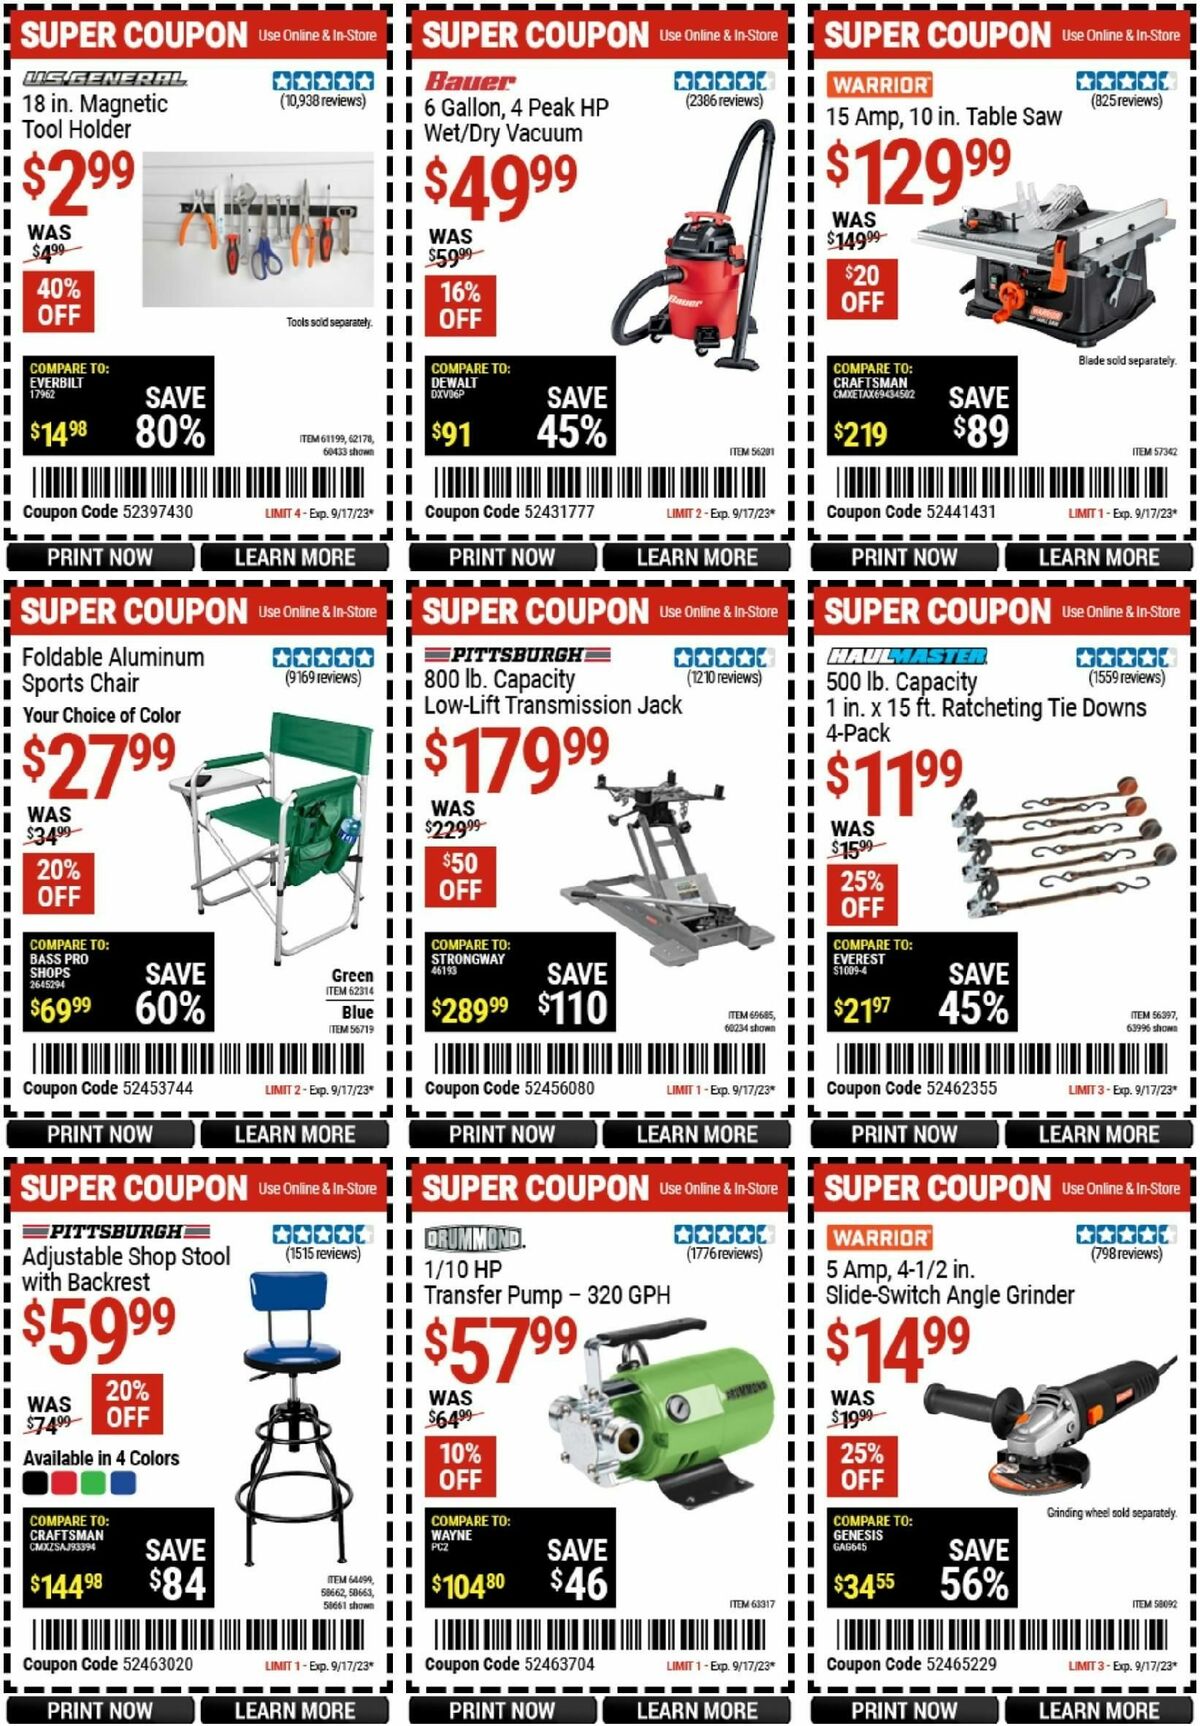 Harbor Freight Tools Weekly Ad from September 5